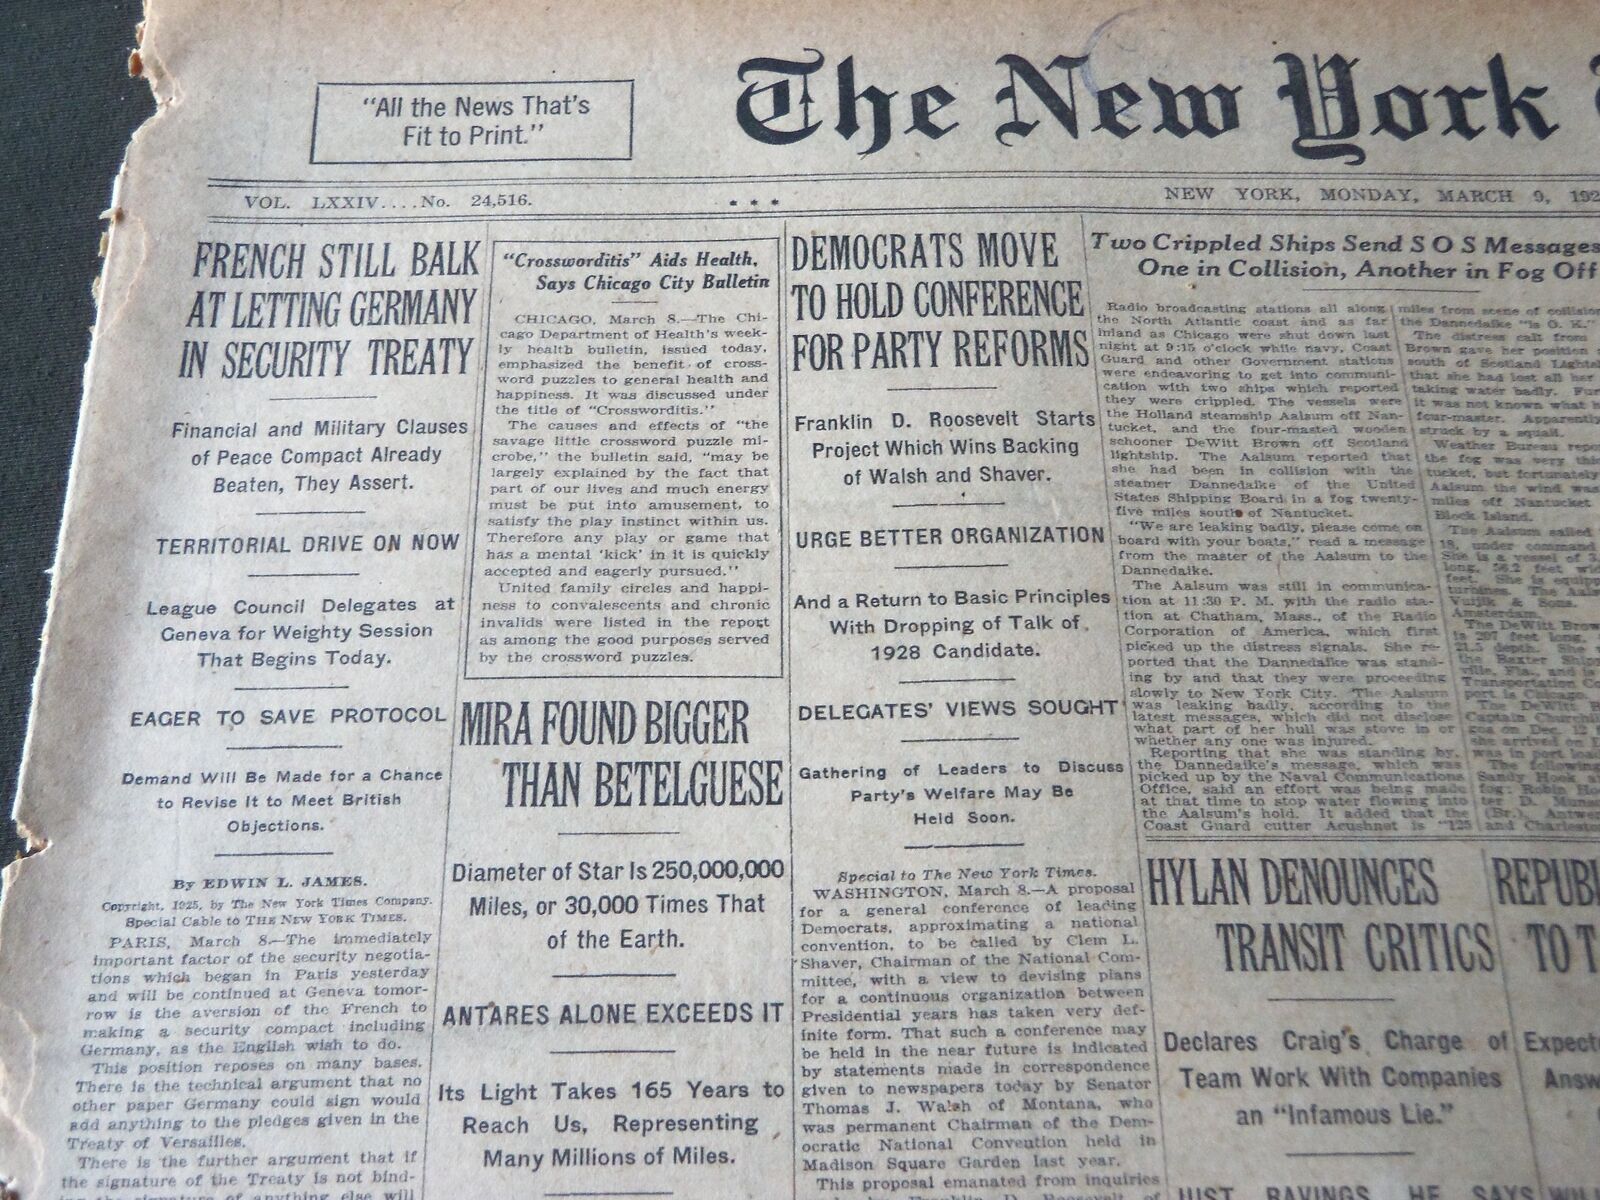 1925 MARCH 9 NEW YORK TIMES - MIRA FOUND BIGGER THAN BETELGUESE - NT 7189